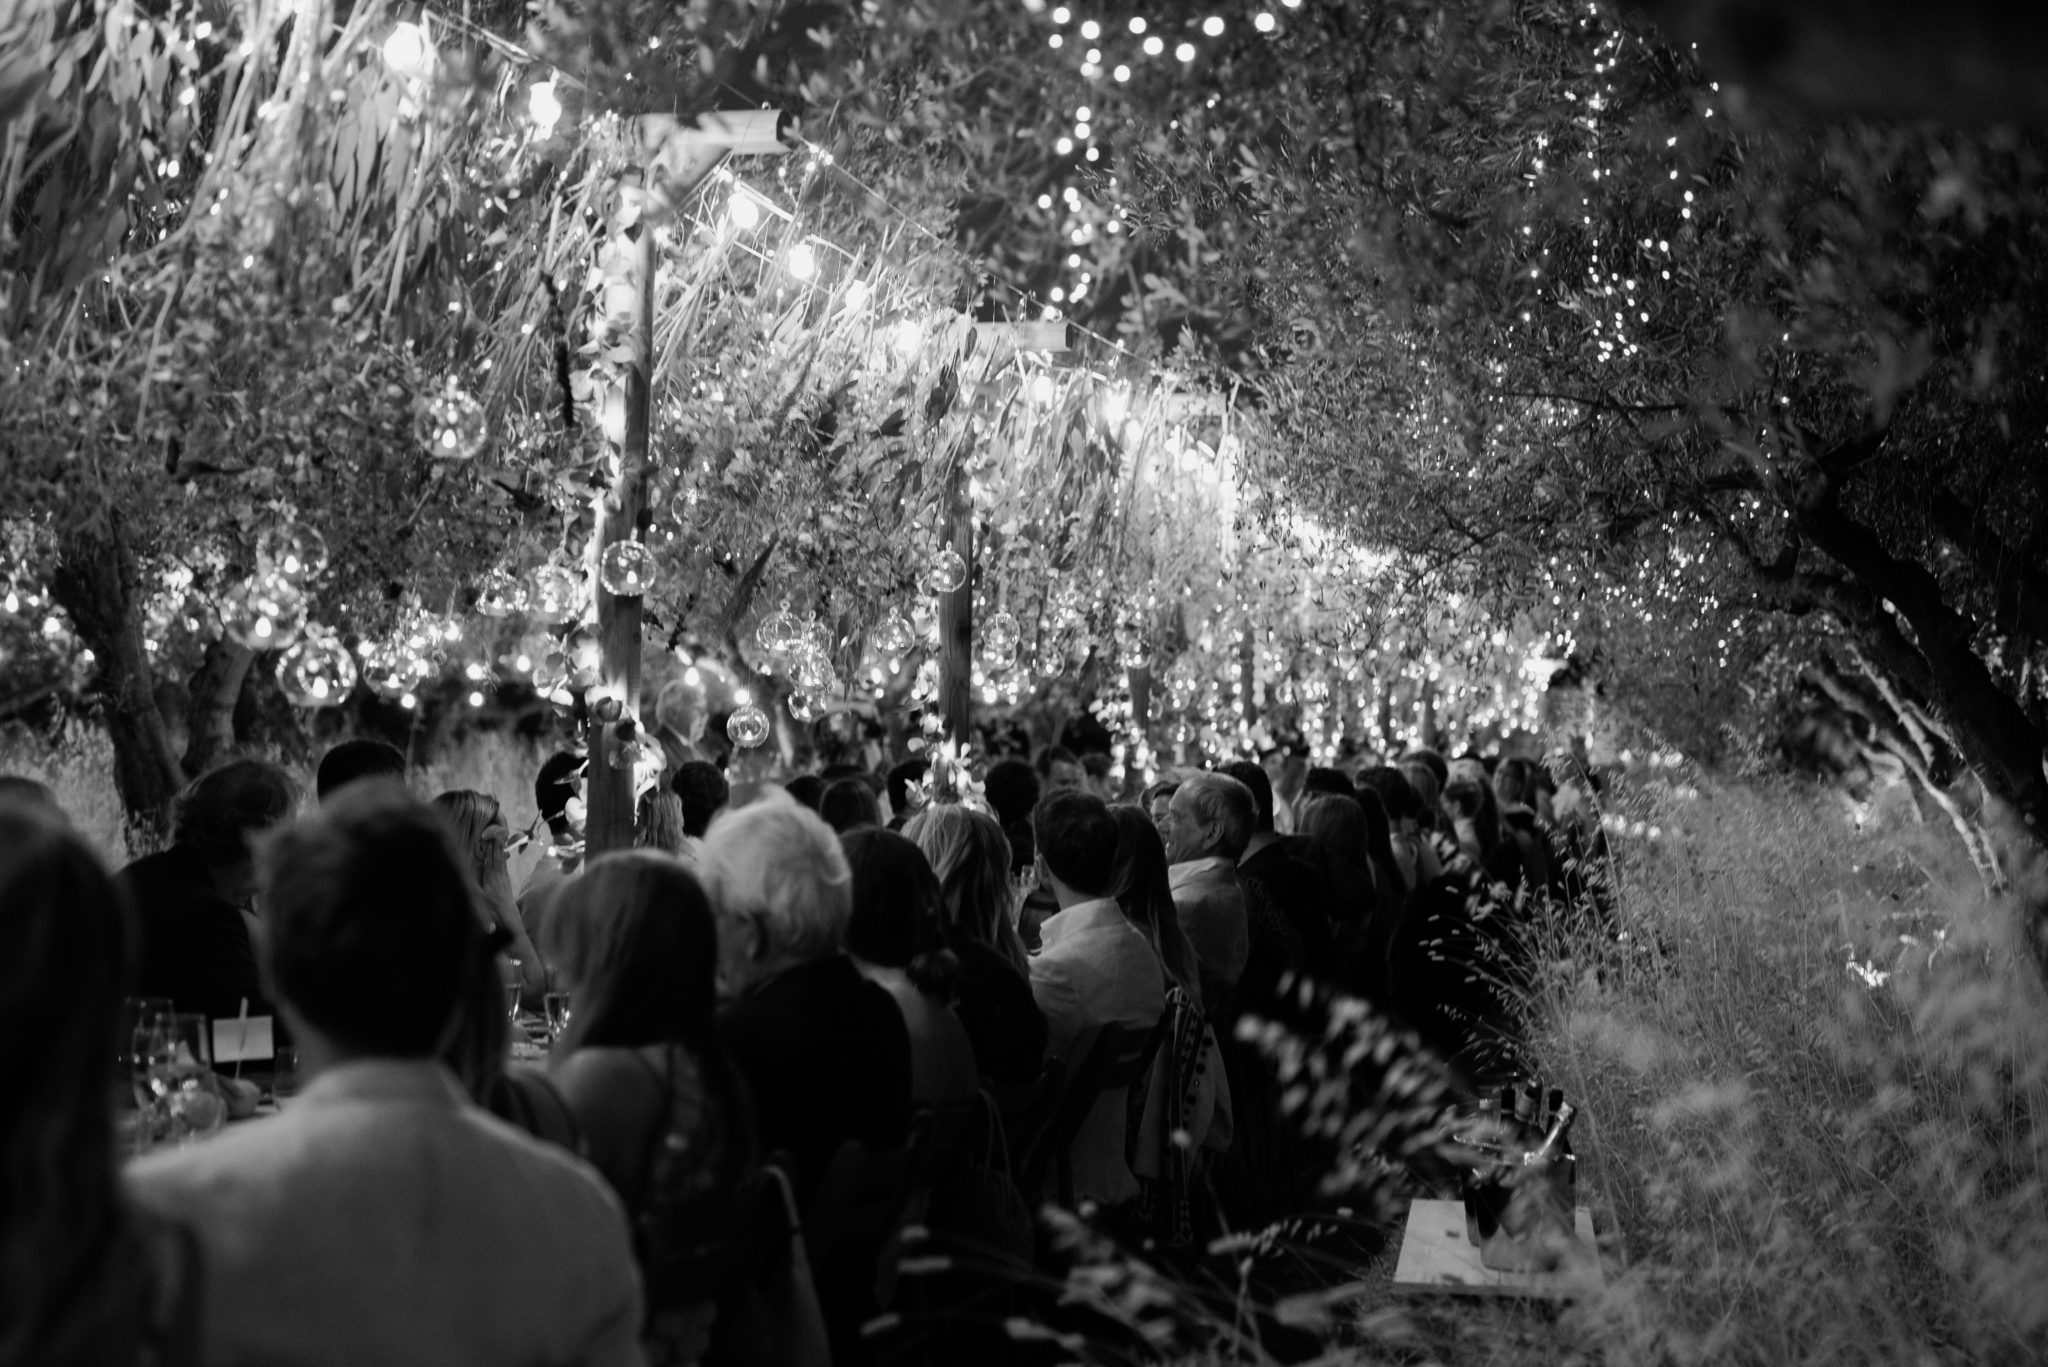 A long table in an olive grove with wildflowers hanging above it